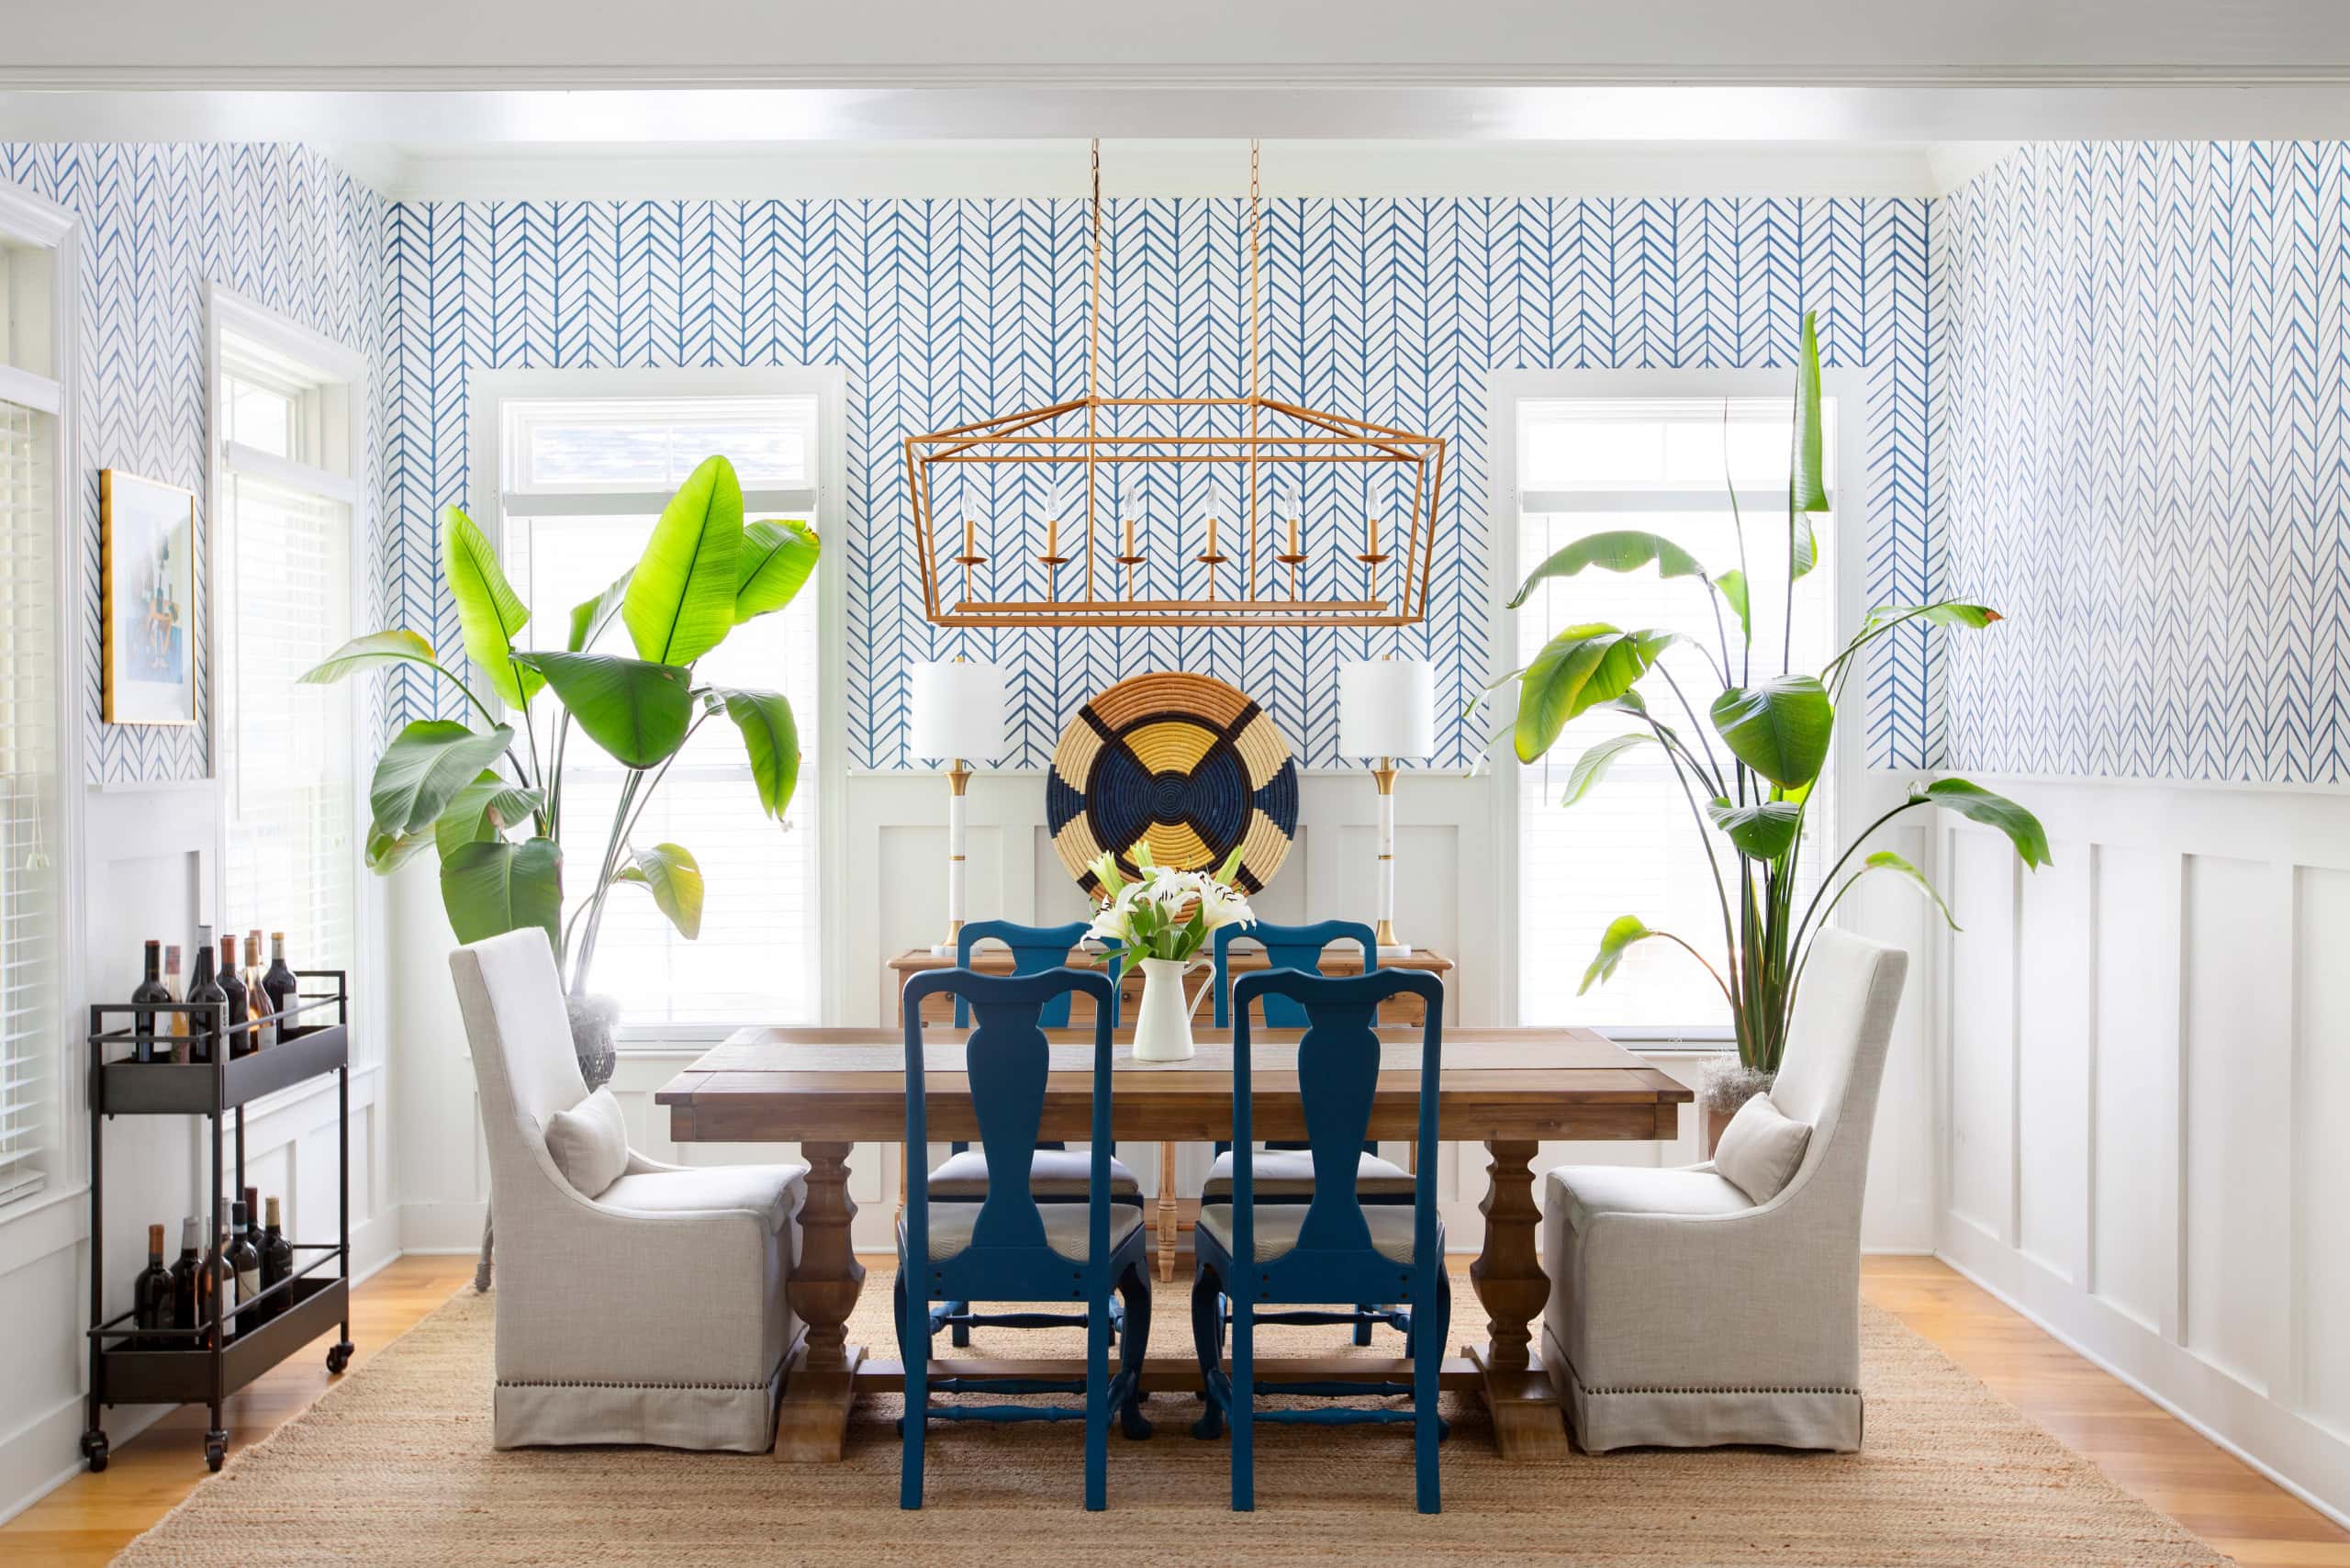 Living room with a tropical decor featuring bold blue wallpaper